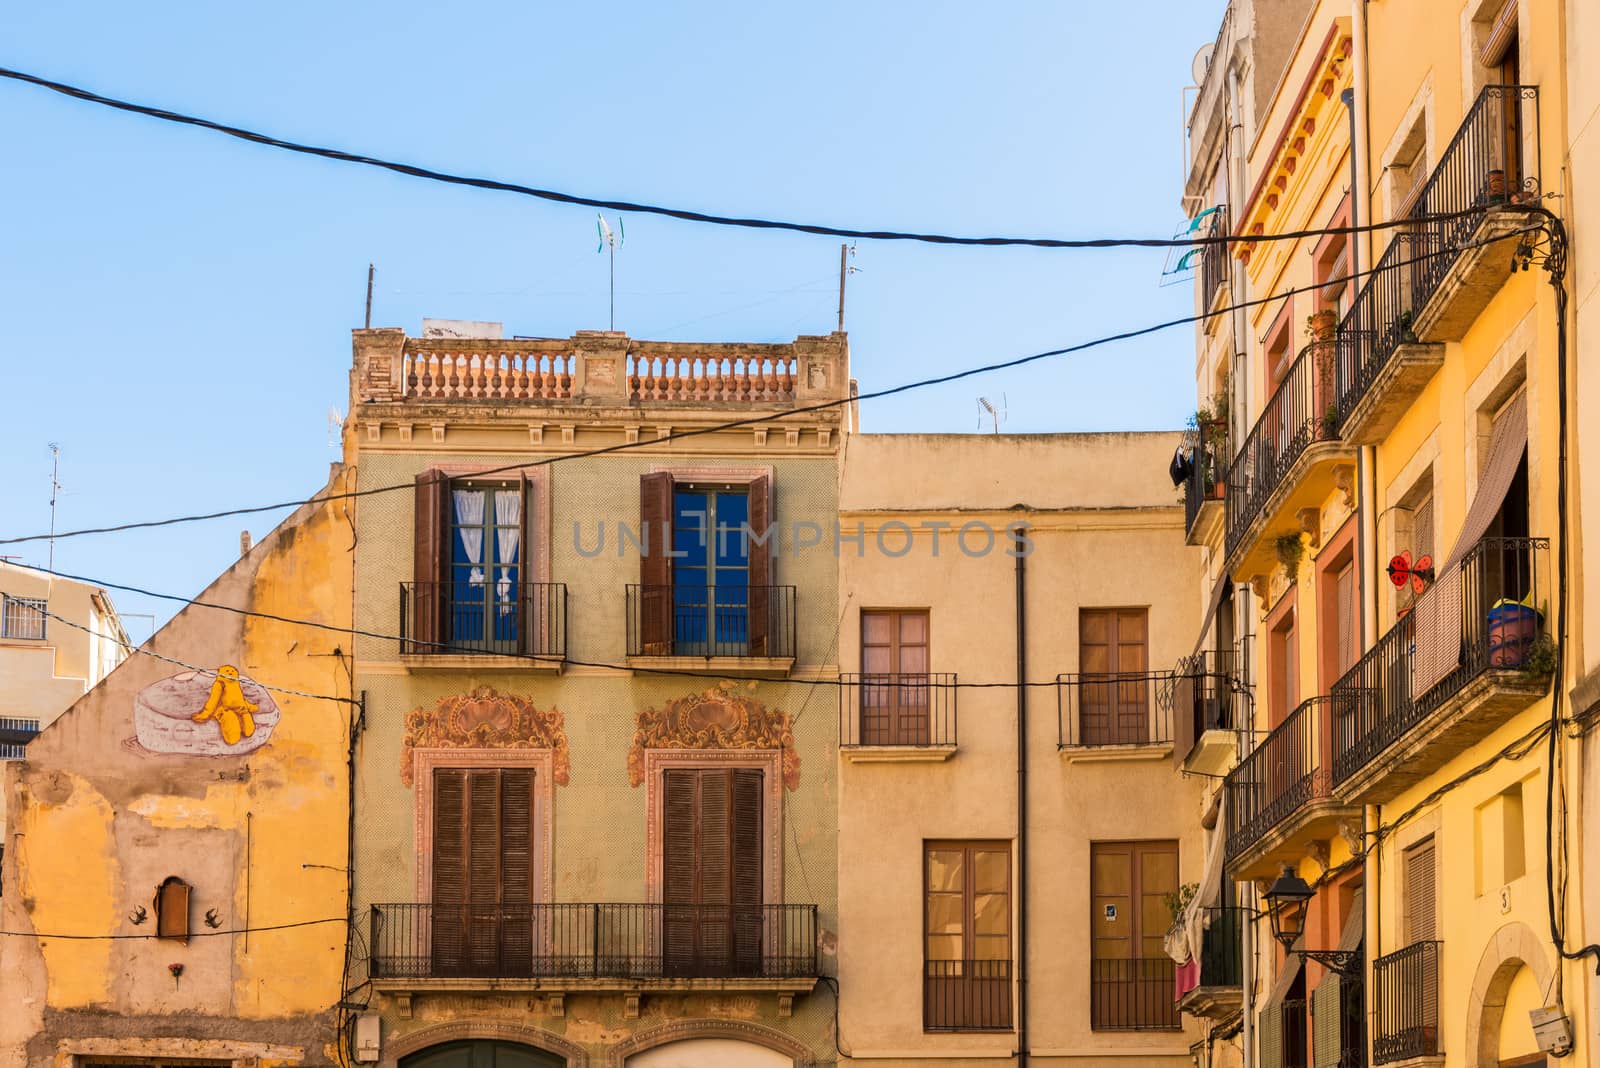 View on old houses in Tarragona, Spain. The old part of town is UNESCO World Heritage Site.